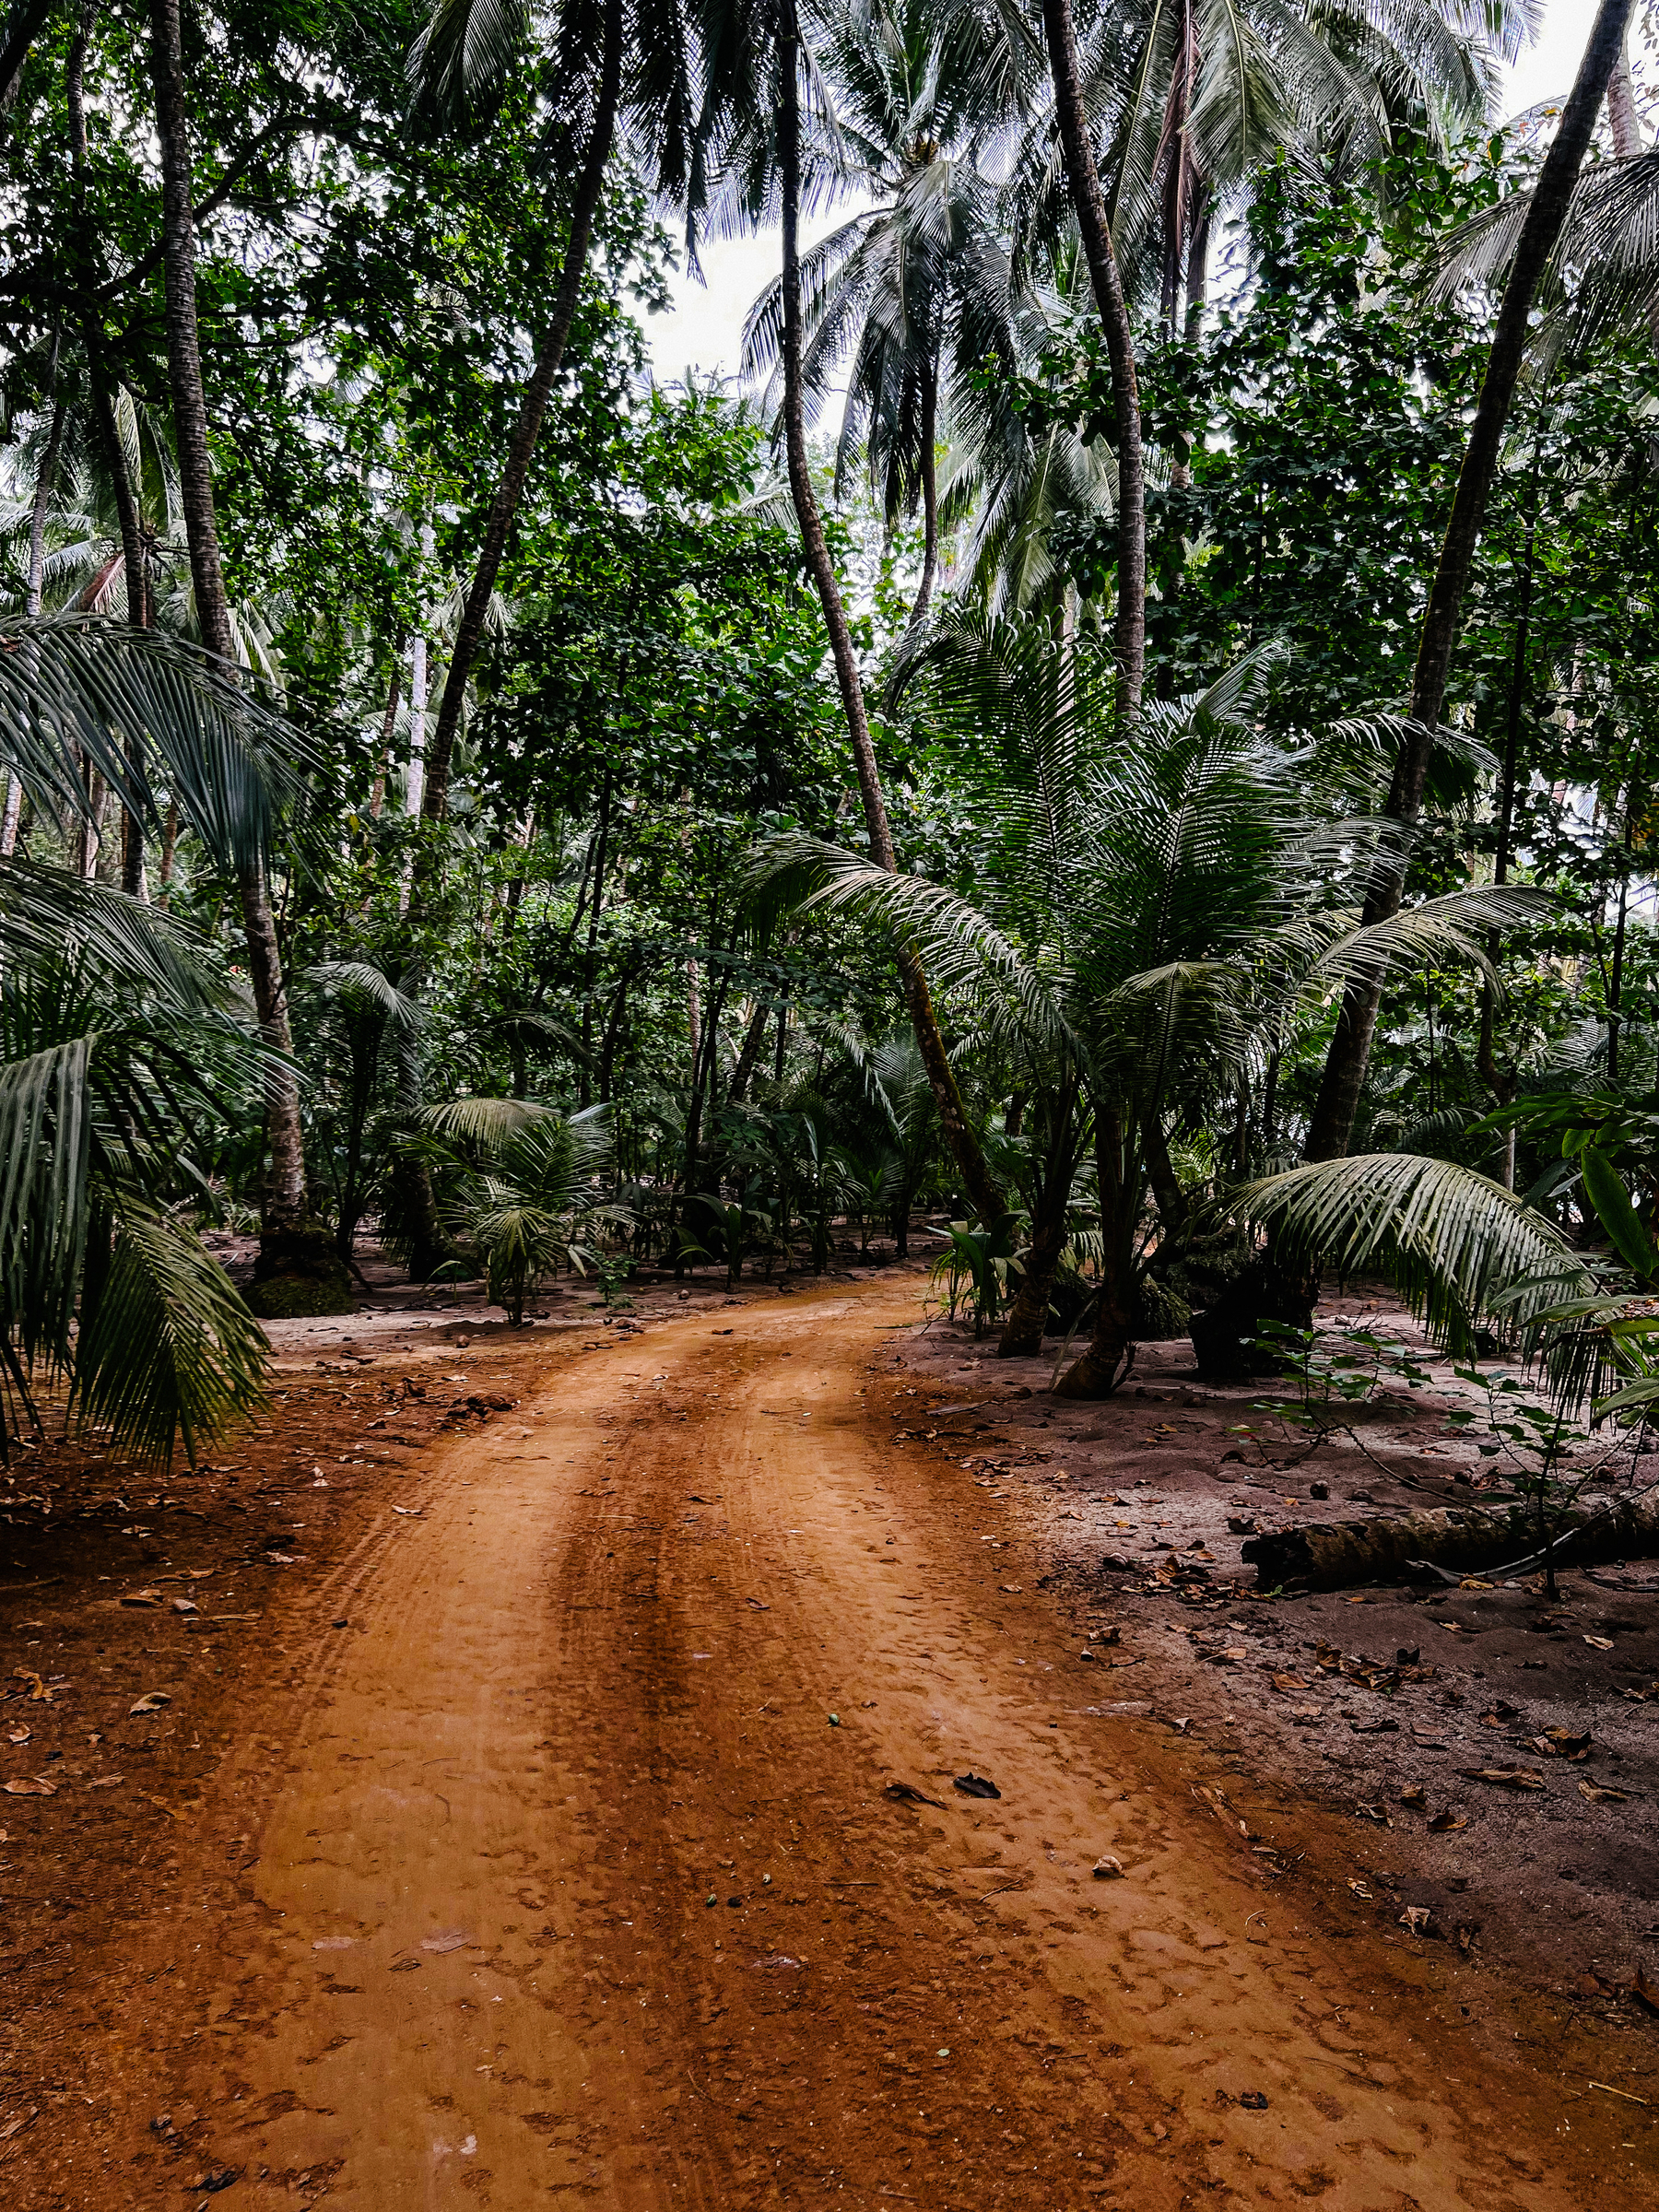 A path through a forest, plenty of palm trees around. 